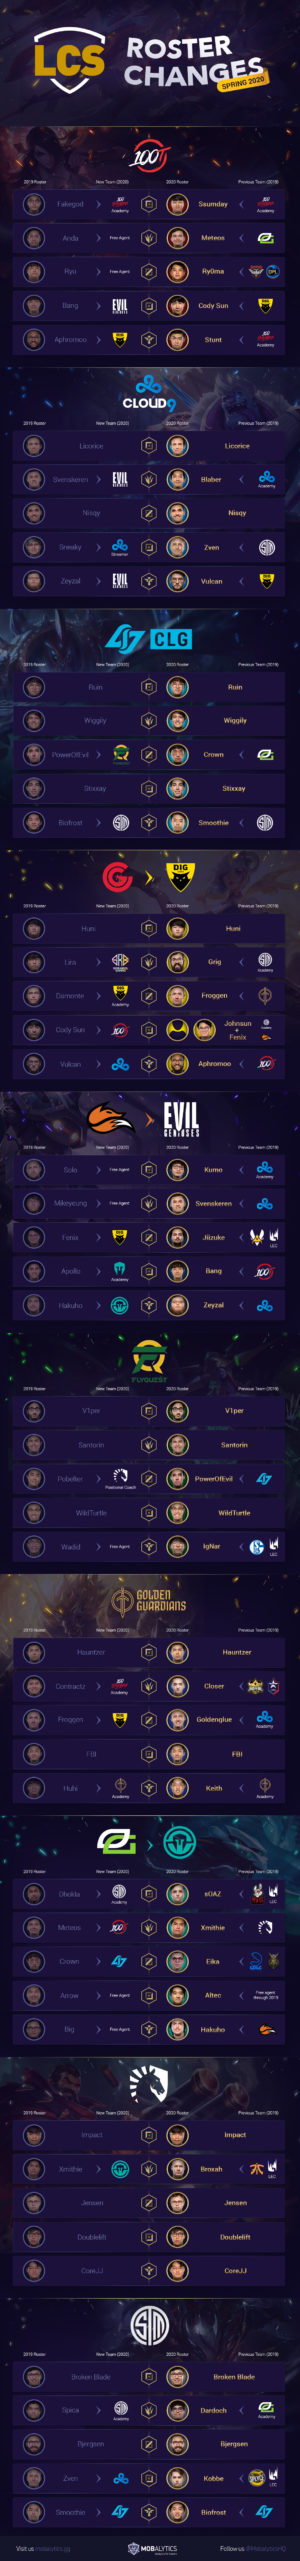 LCS Roster Changes Infographic (Spring 2020 Teams)